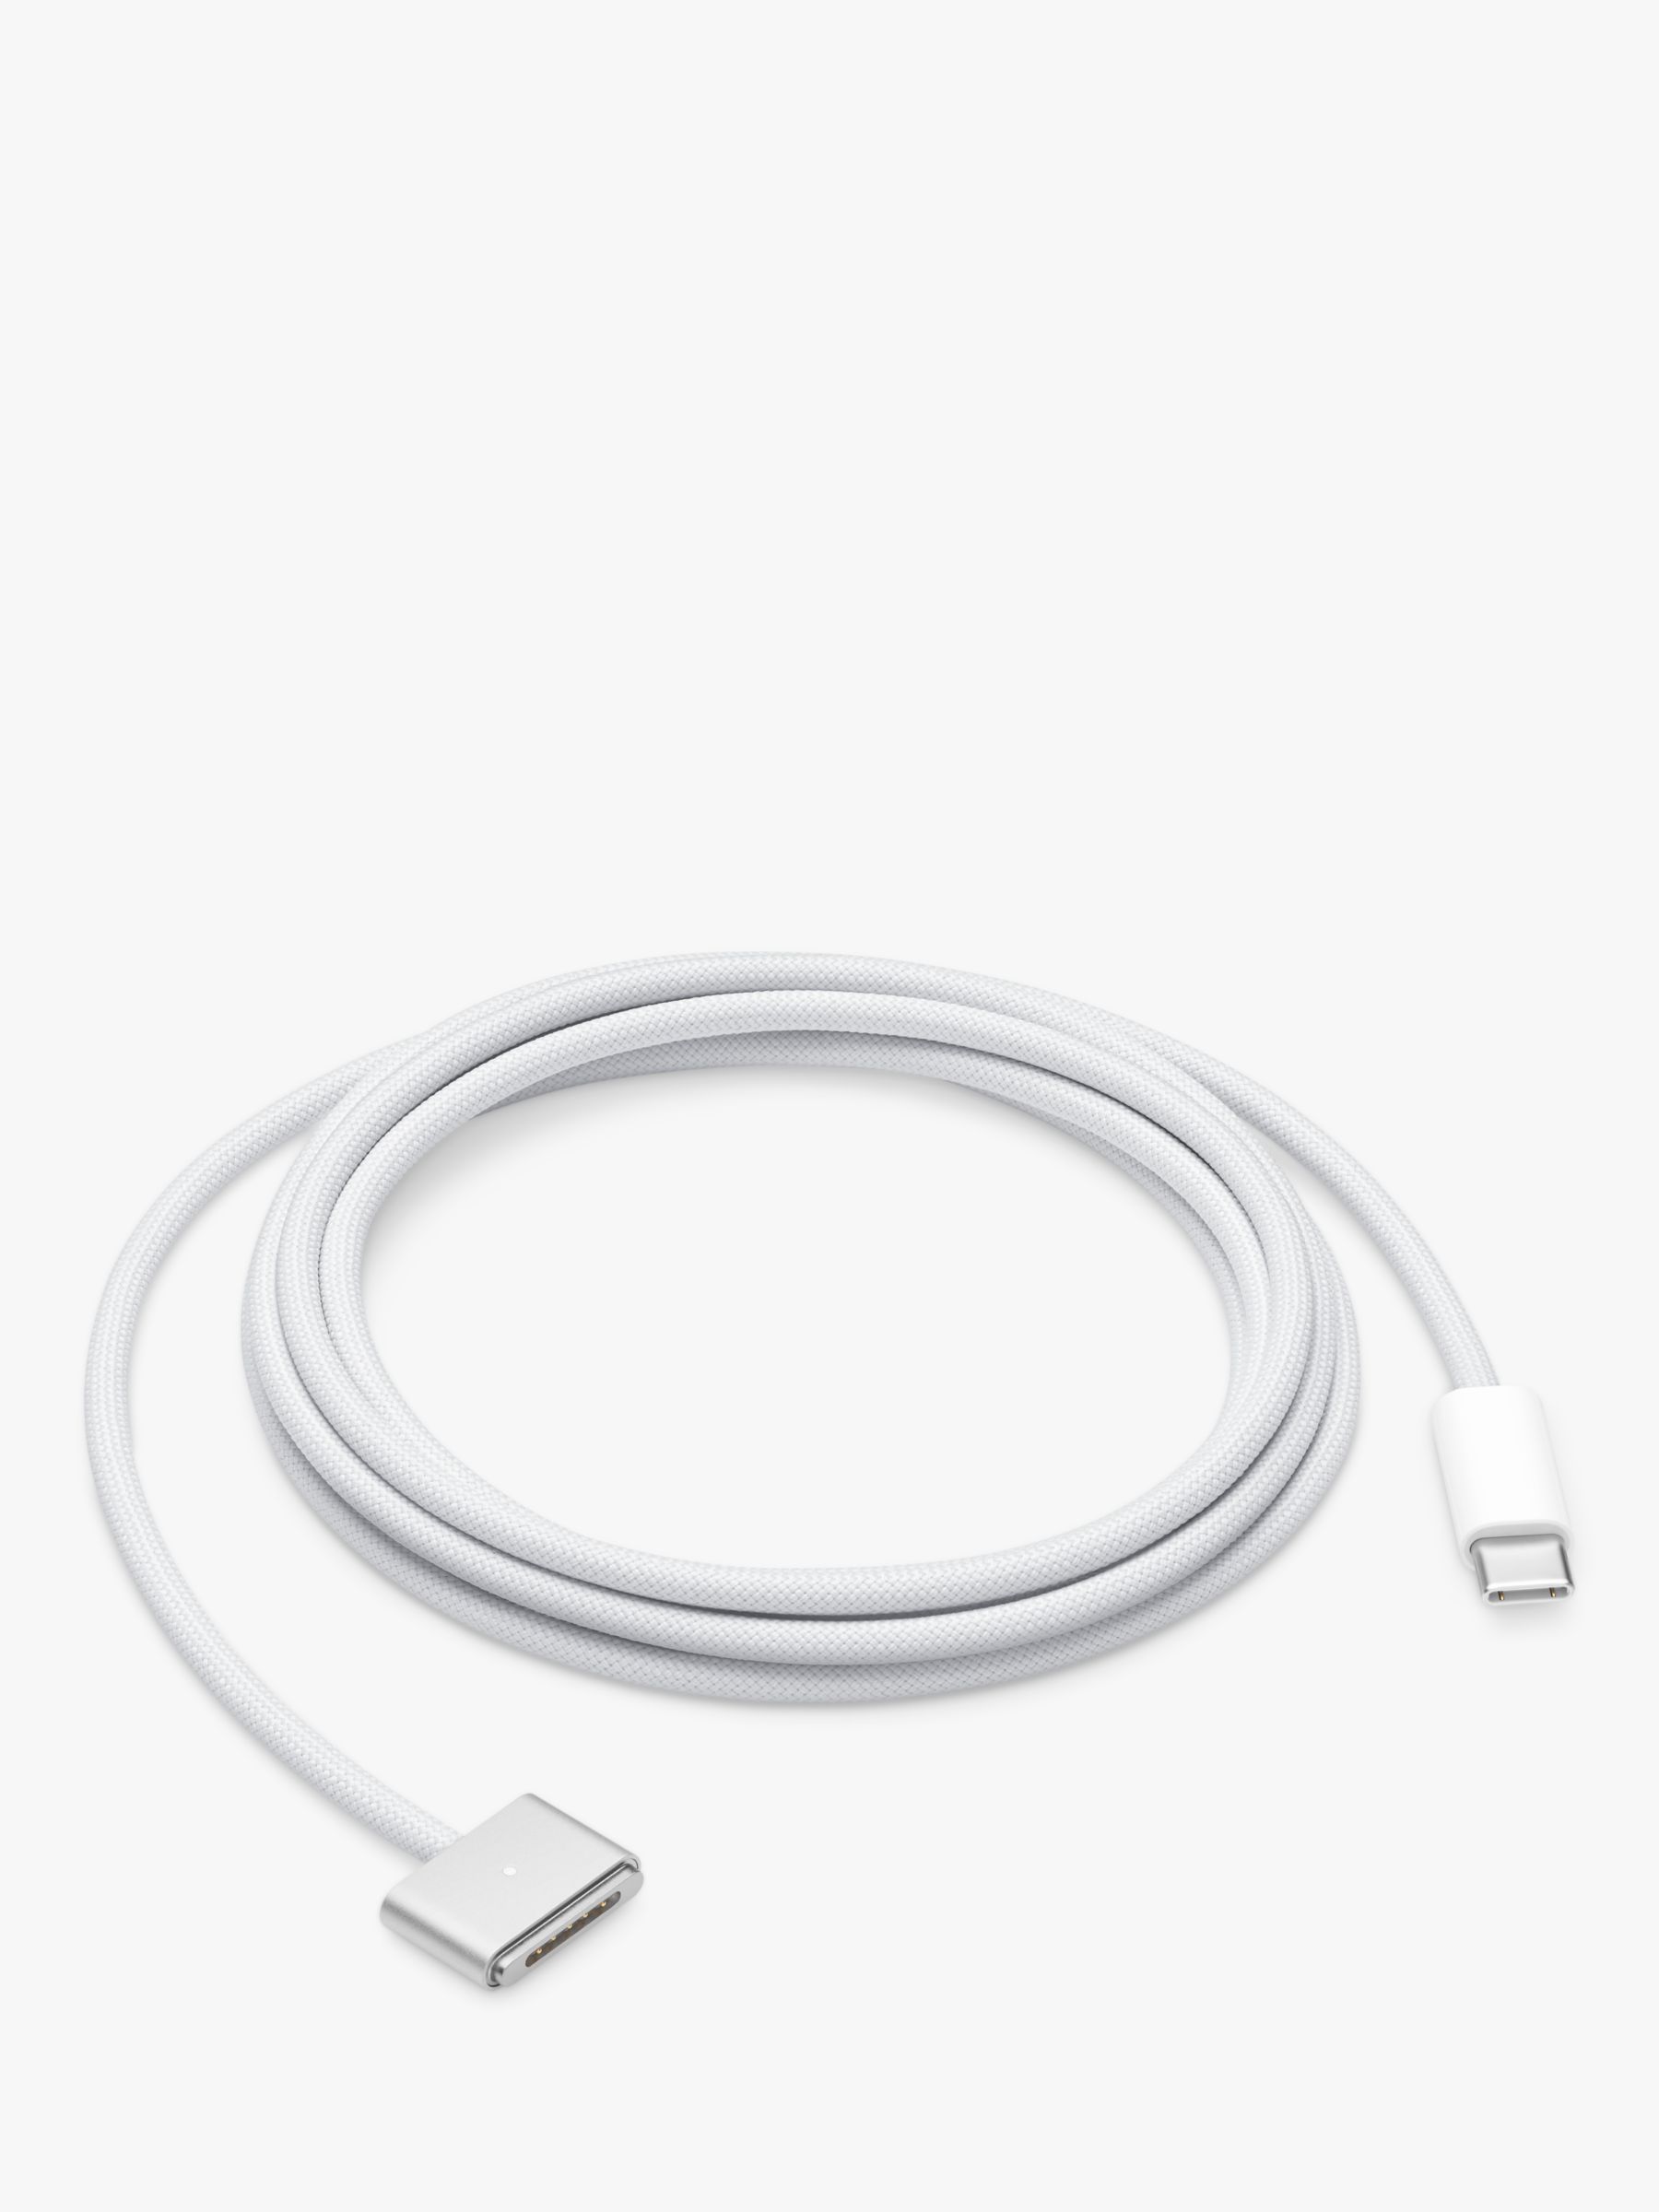 Apple MagSafe Charger review: A cool accessory, but does it beat the  lightning cable?